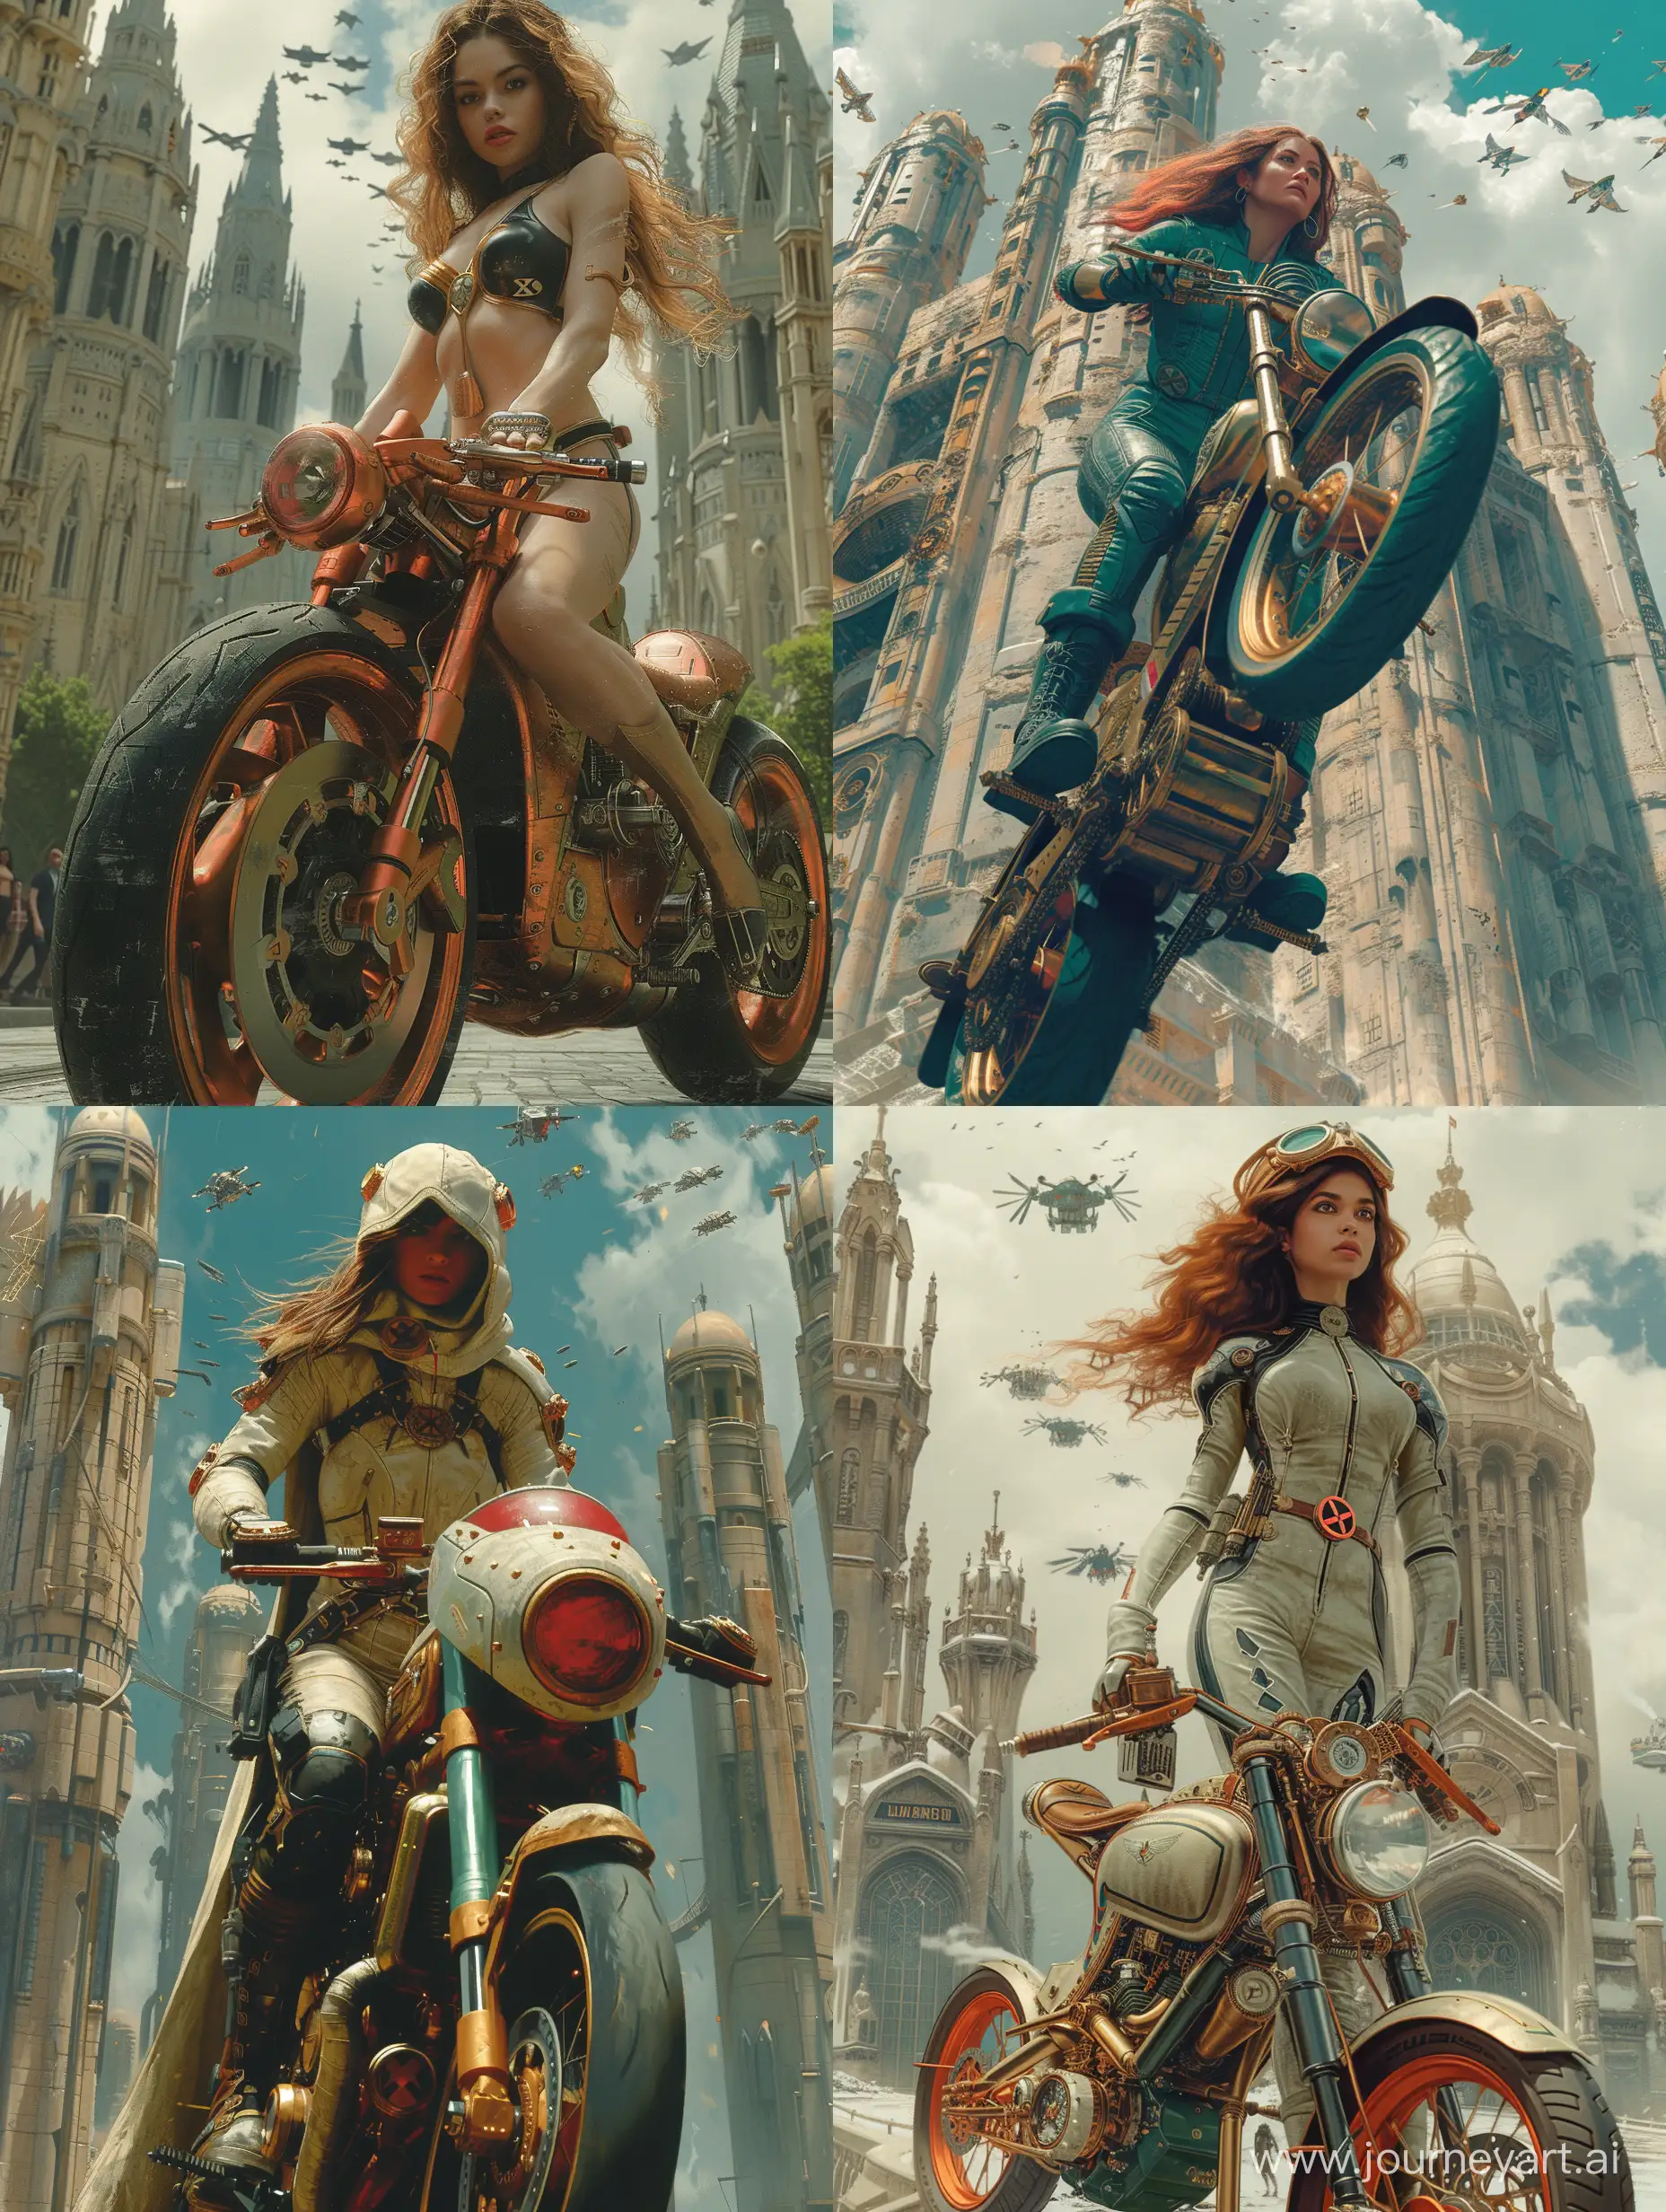 Women Amazon warrior with futuristic motorcycle in the steampunk style of the Victorian era state of street on big towers with magic mechanisms and laboratory devices, in sky flying derigibles, Luis Royo and Jim Lee style, features, ancient, highly detailed, complex, golden ratio composition, X-Men comic book cover, --v 6.0 --ar 3:4 --s 750